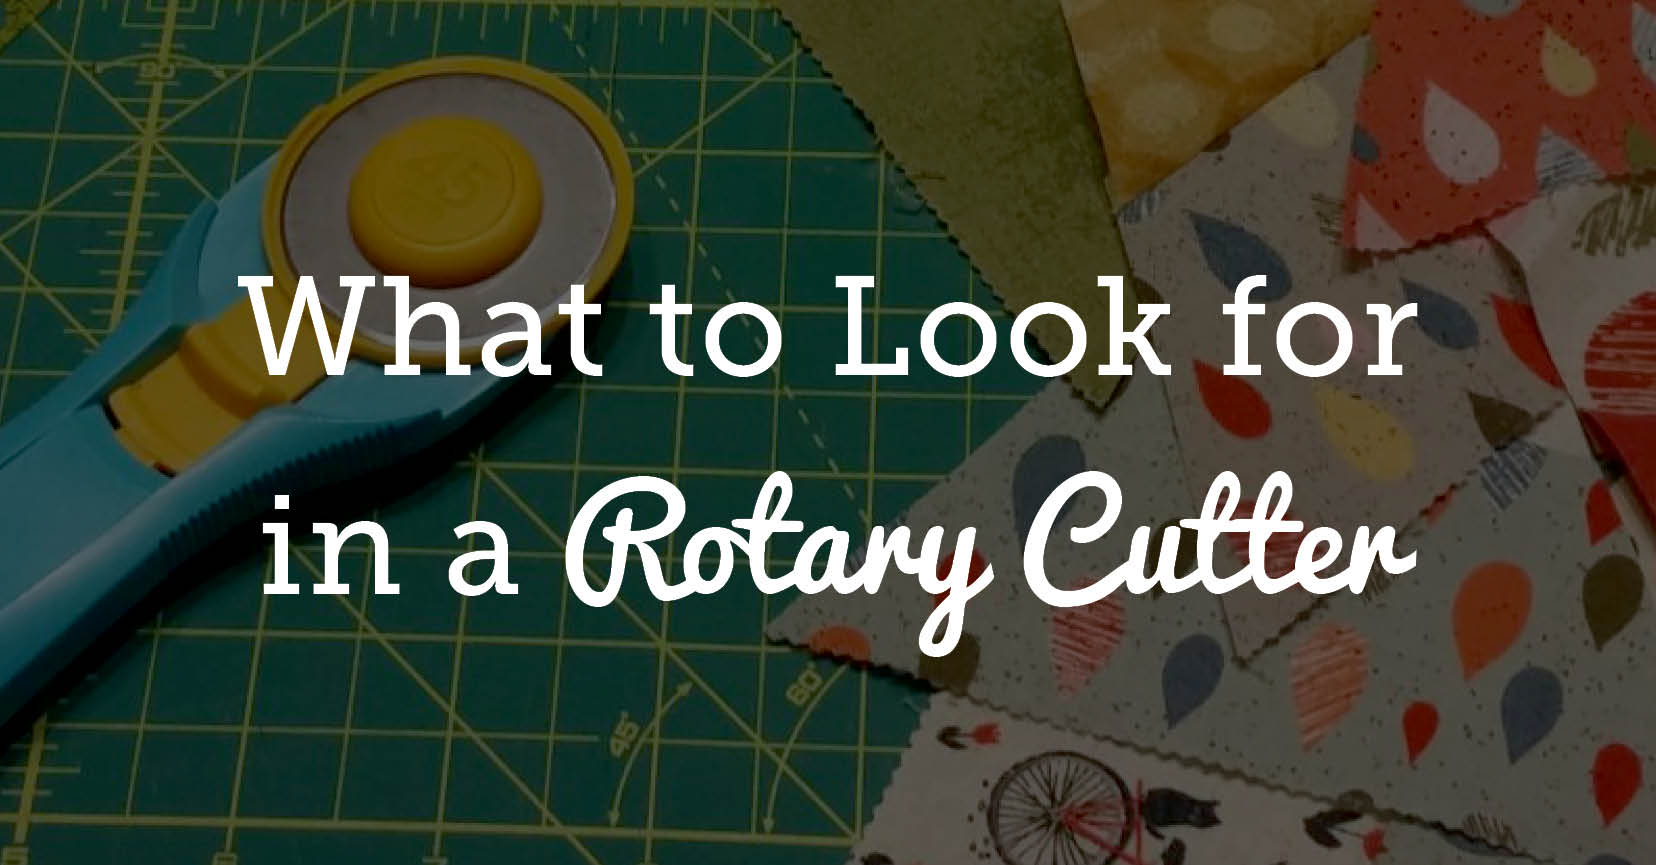 What to Look for in a Rotary Cutter